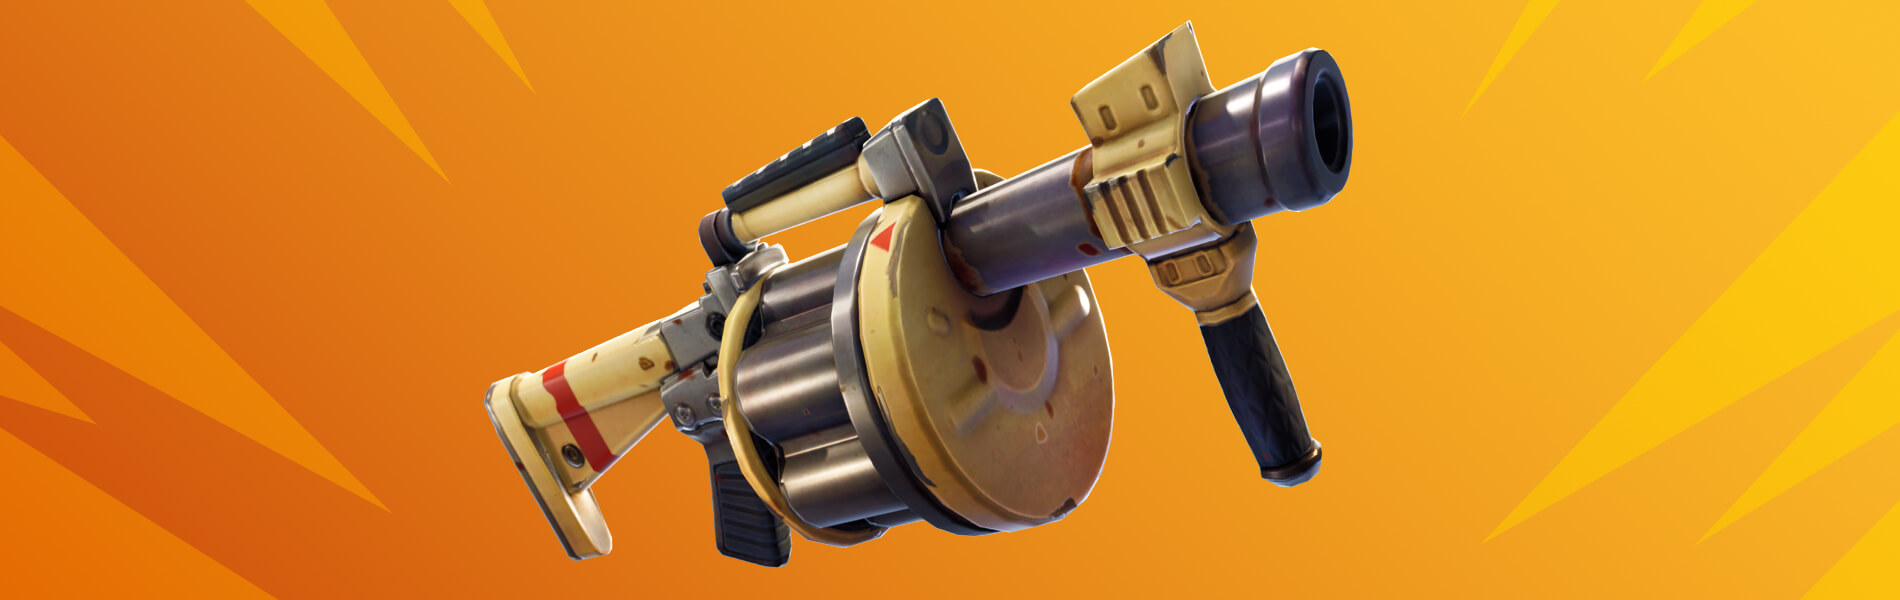 Patch Notes for Fortnite v19.10 - Tilted Towers, Klombos, Grenade Launcher & more